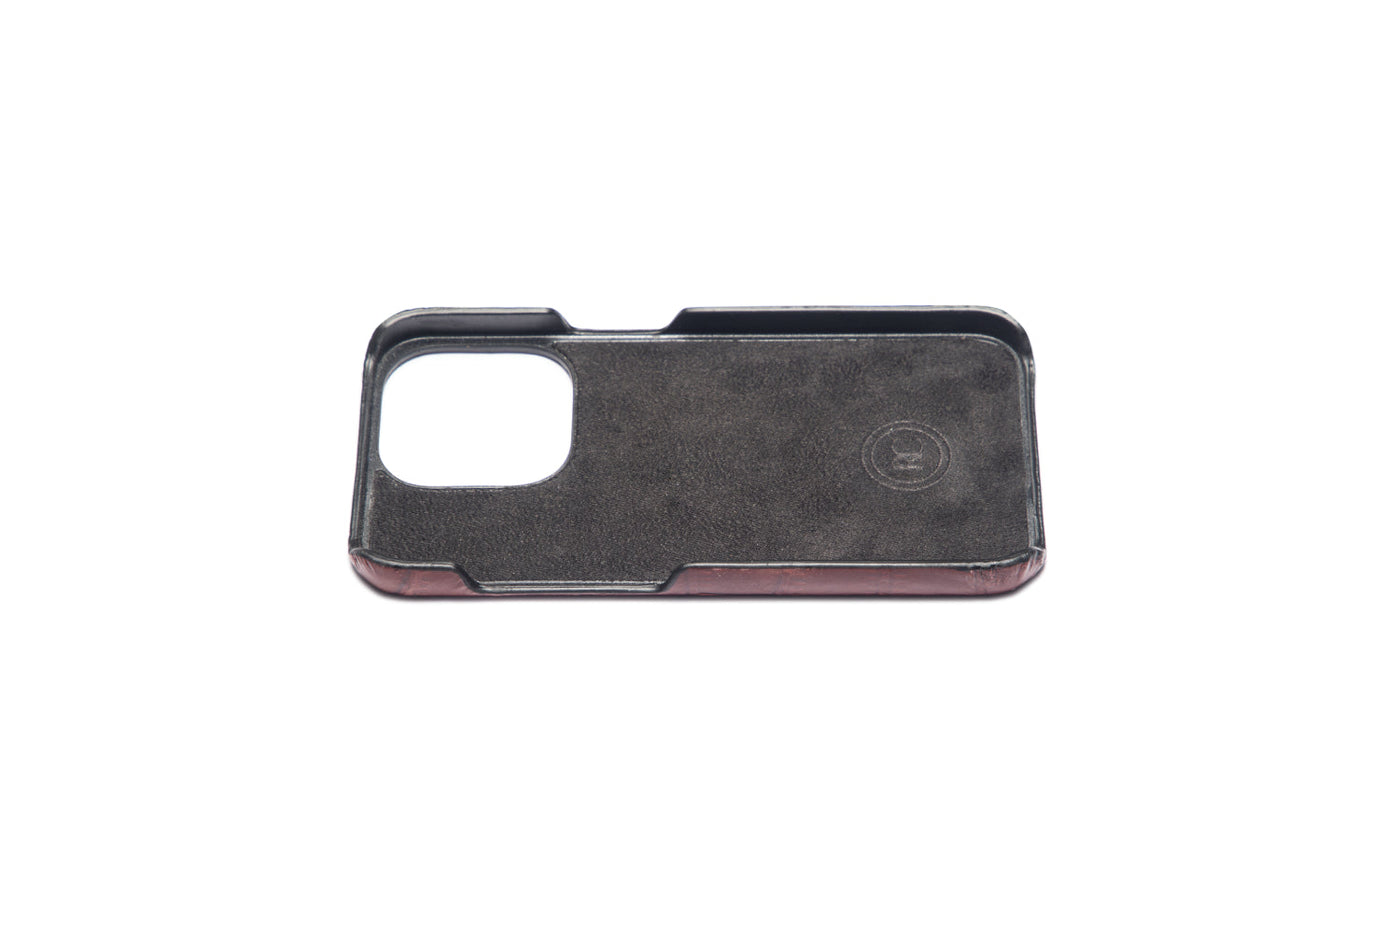 Ombre Brown iphone 13 Pro Max Leather Case